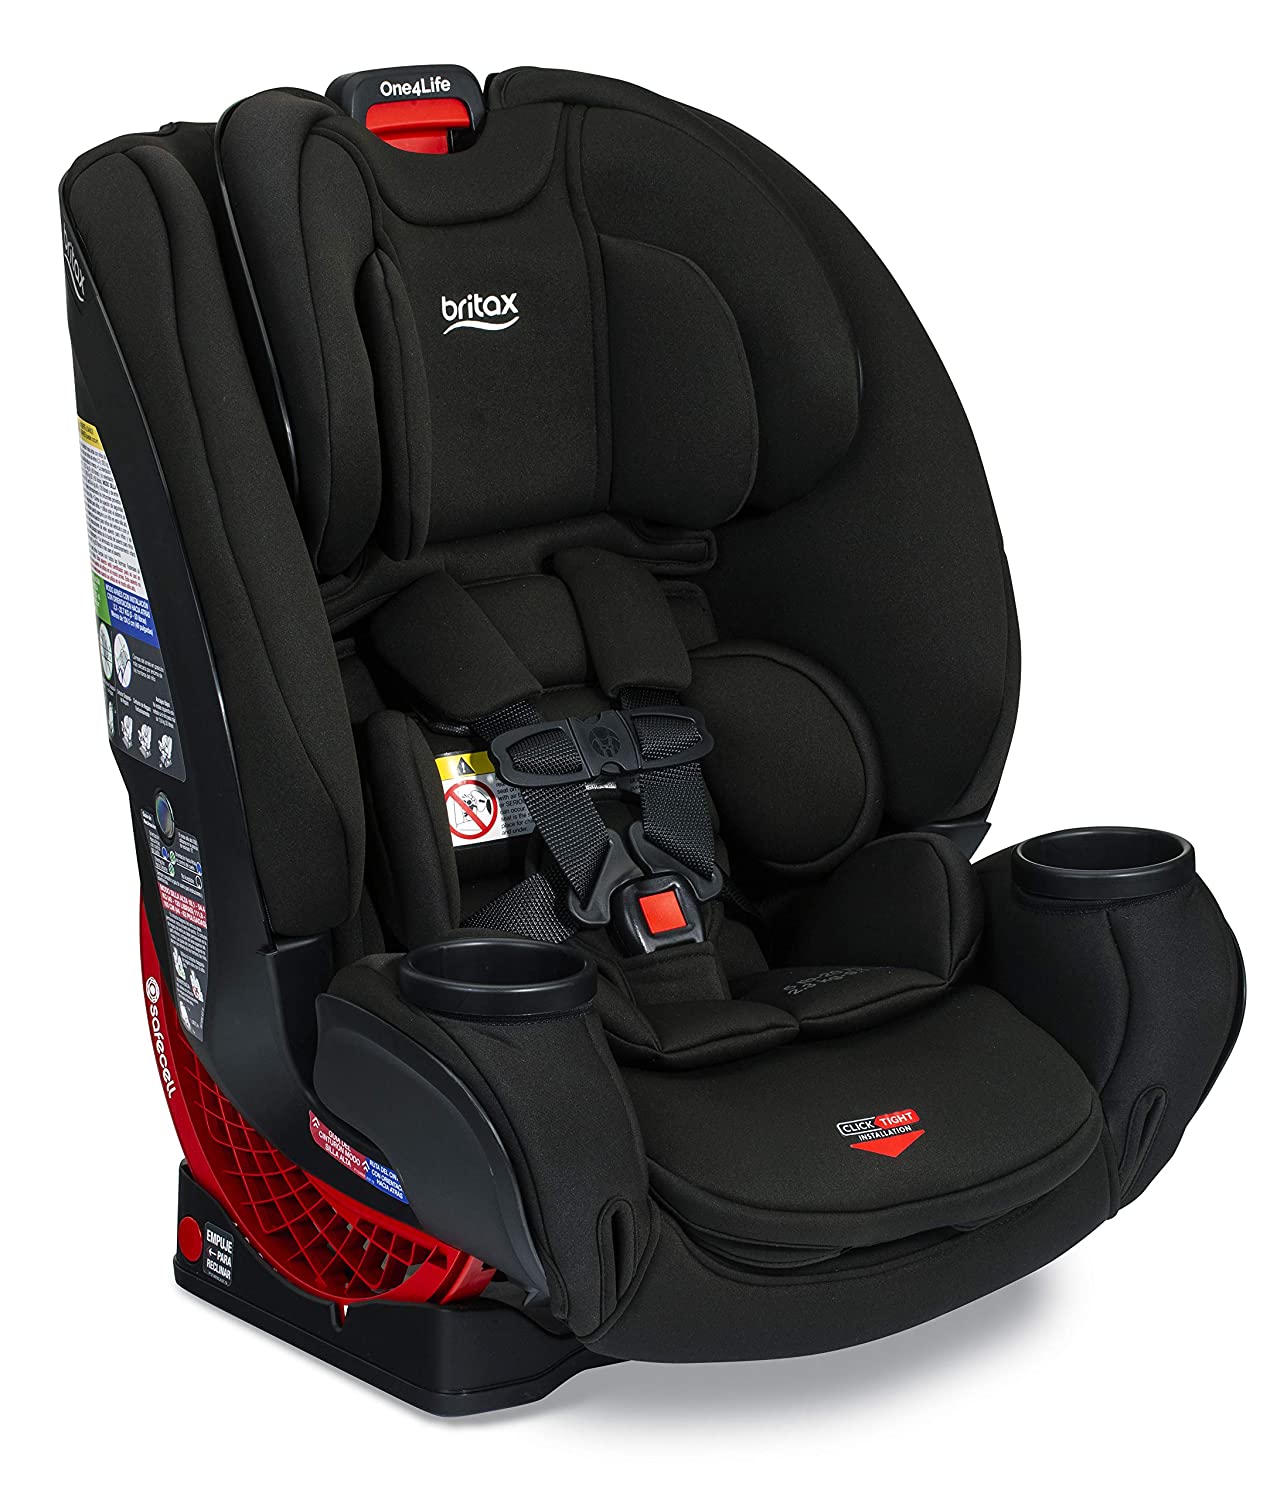 Britax One4life Tight Car Seat Baby On The Move - Britax Car Seat Base Used